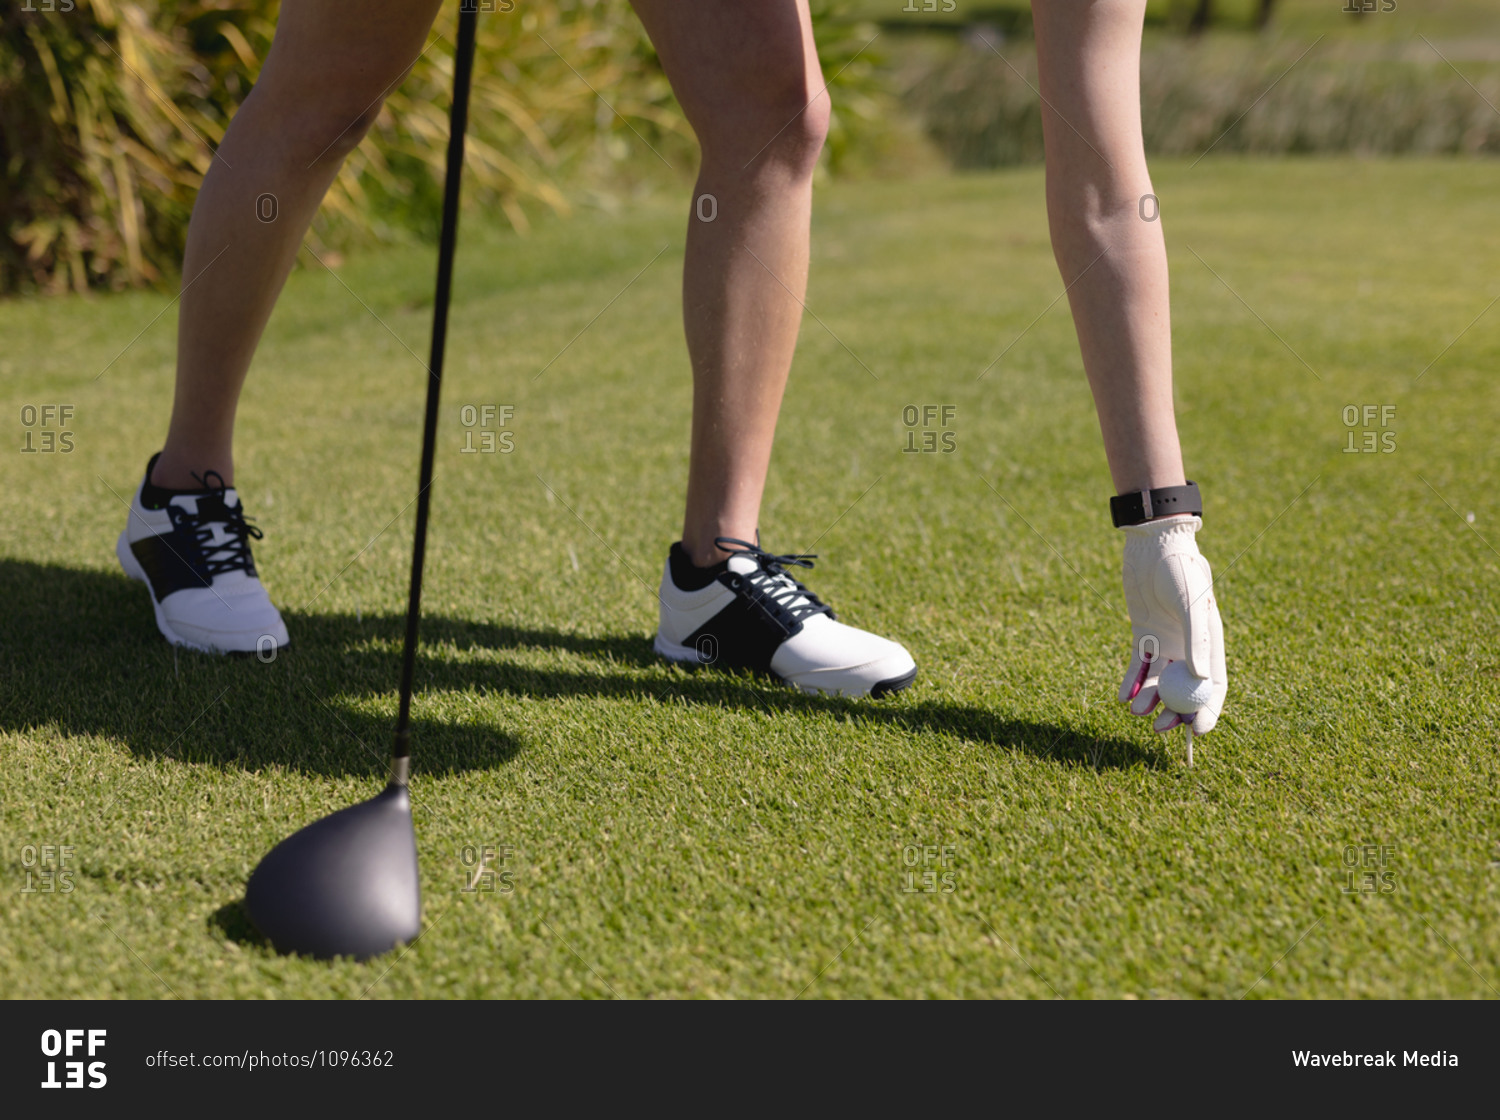 Low section of caucasian woman playing golf placing ball before taking a shot. sport leisure hobbies golf healthy outdoor lifestyle.